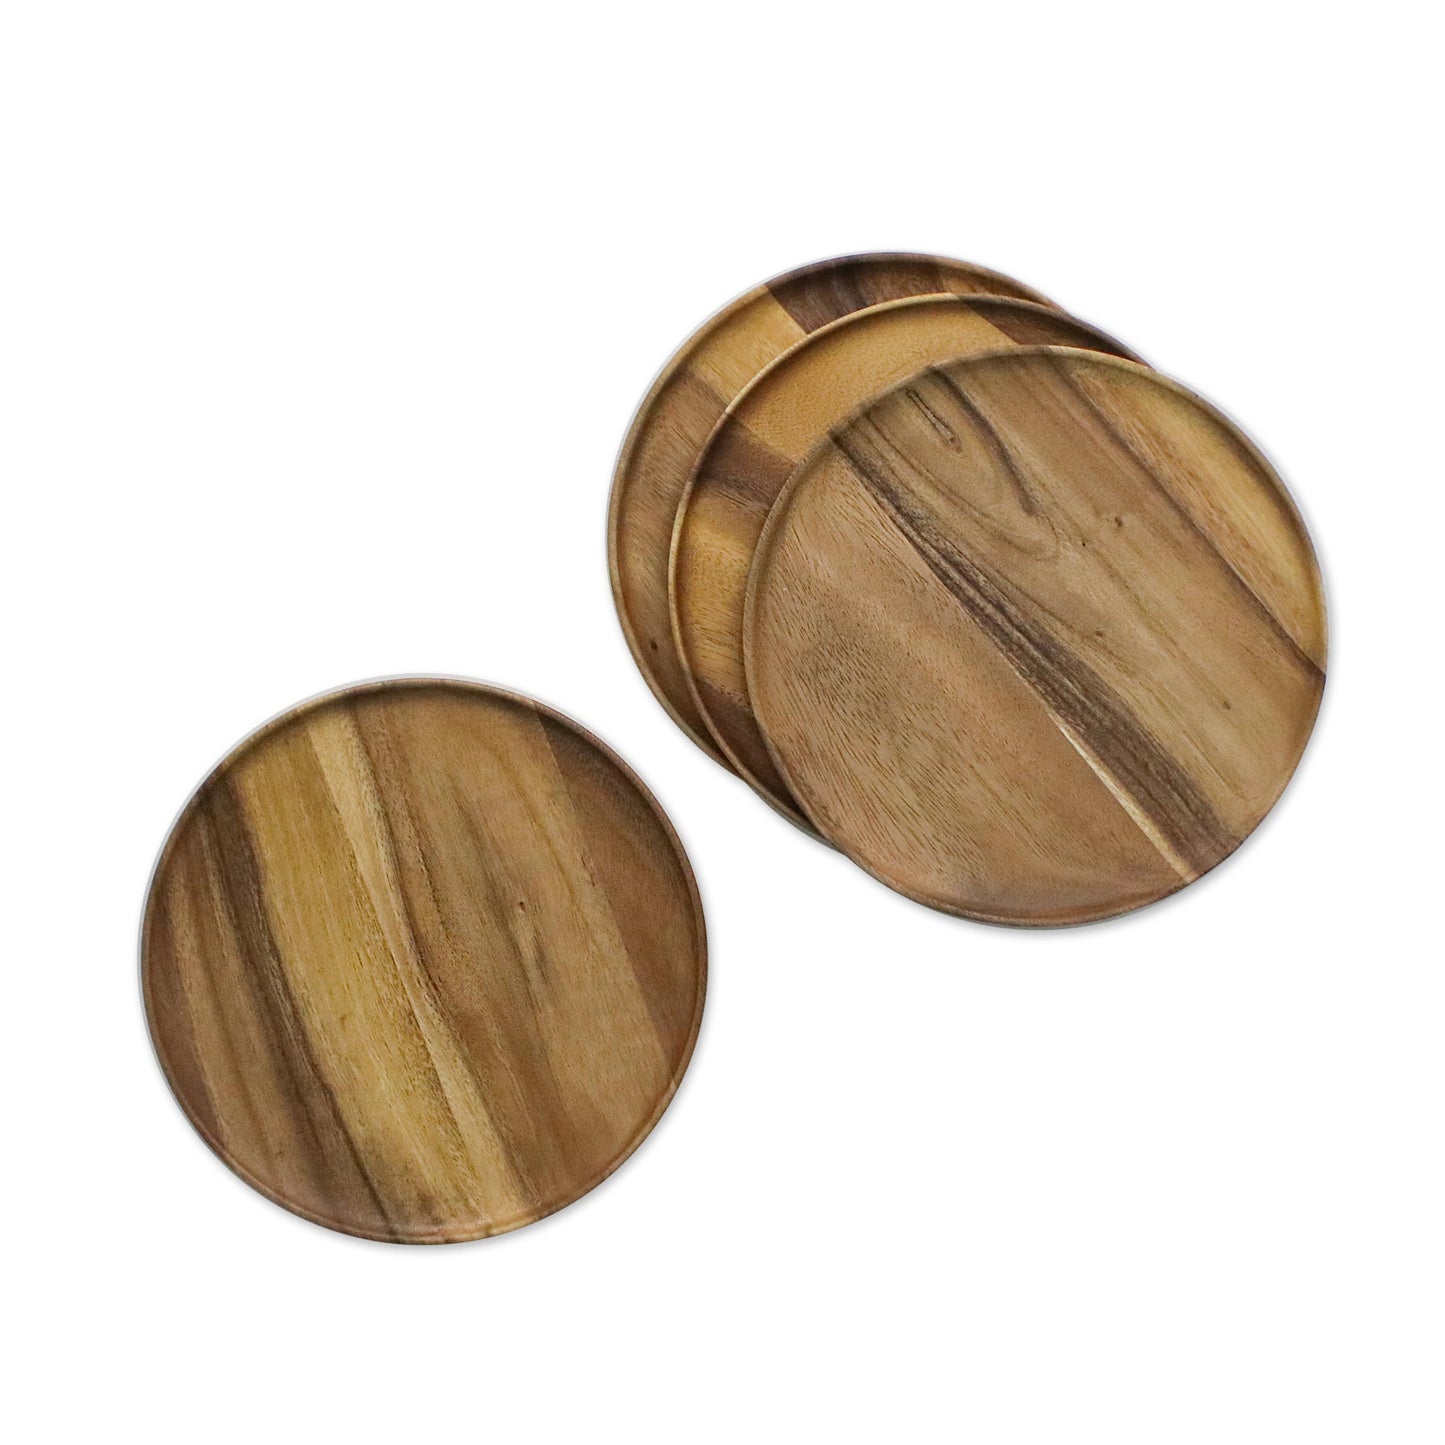 Natural Discs Hand Crafted Round Wood Plate Set